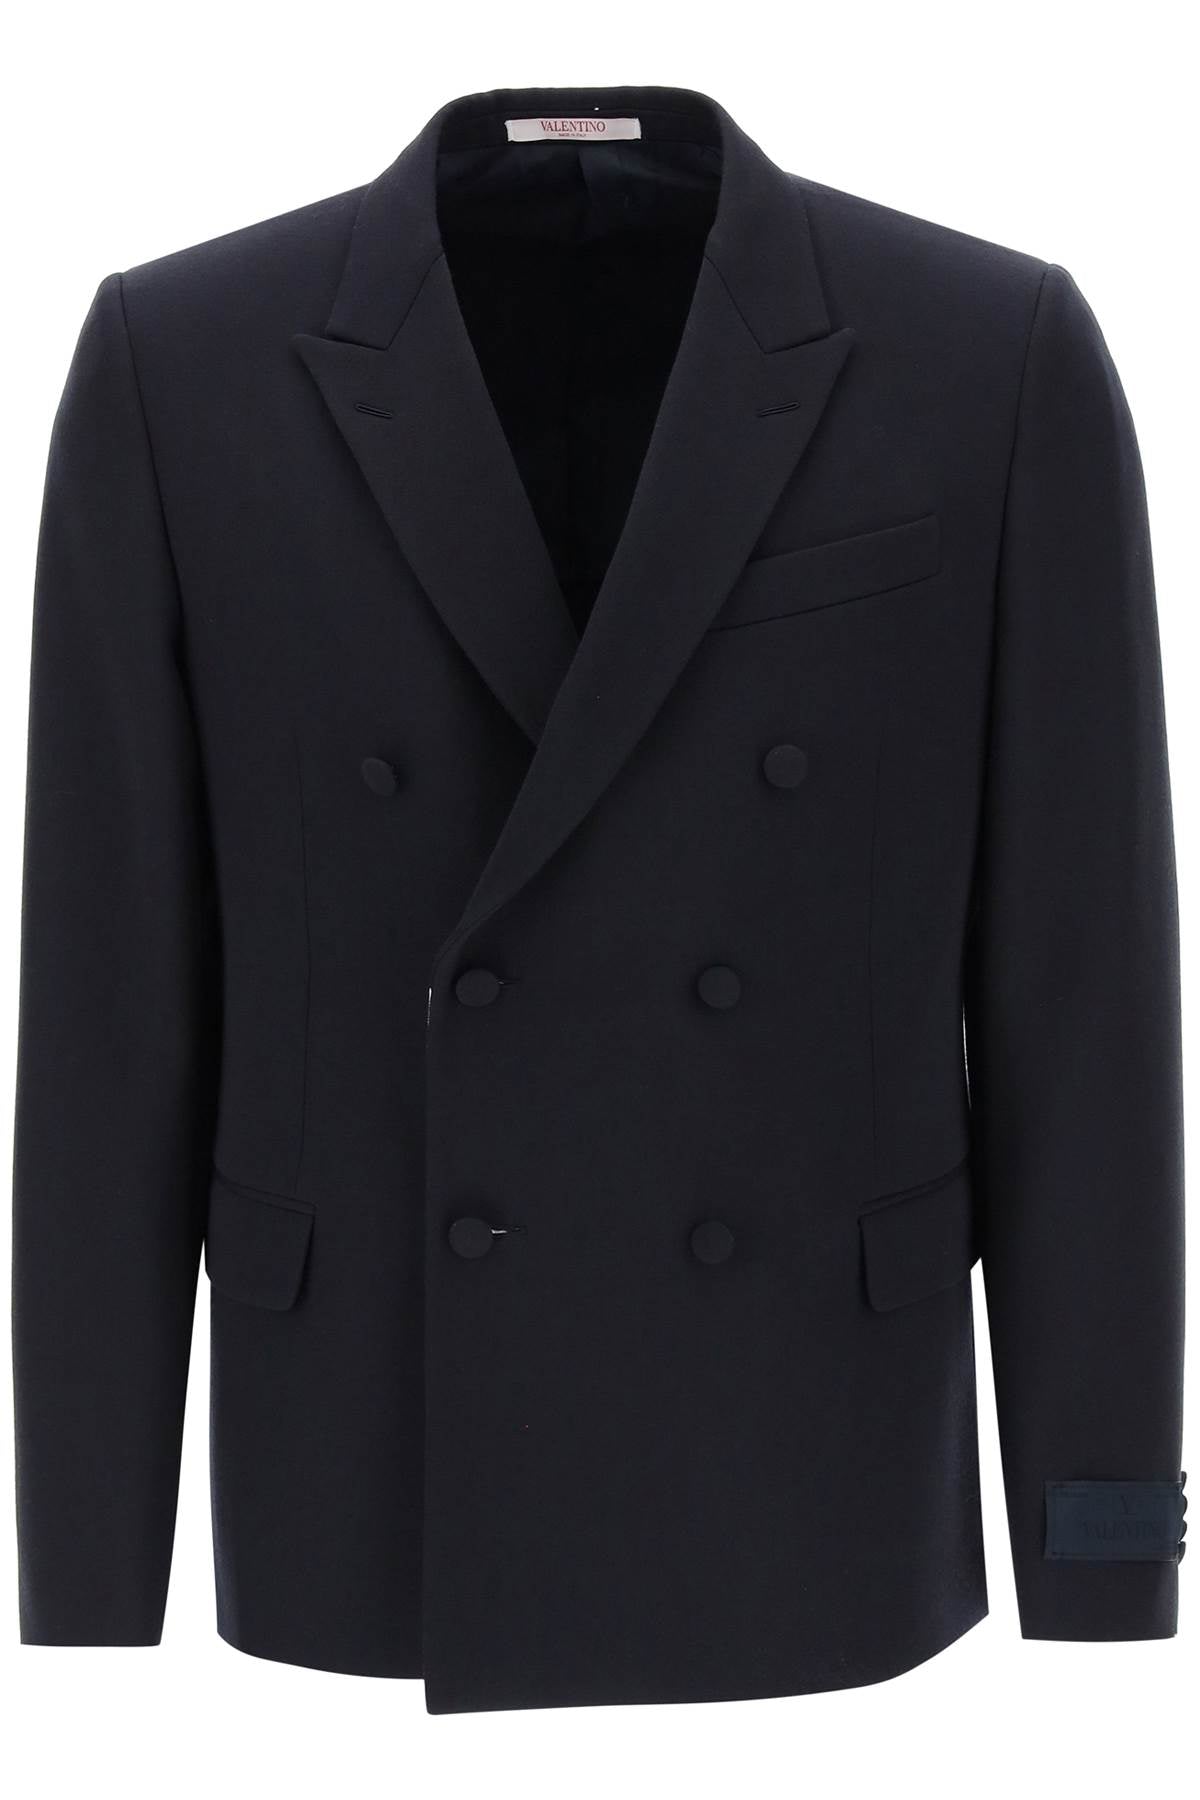 VALENTINO GARAVANI Tailored Blue Double-Breasted Jacket with Contrast Lining - FW23